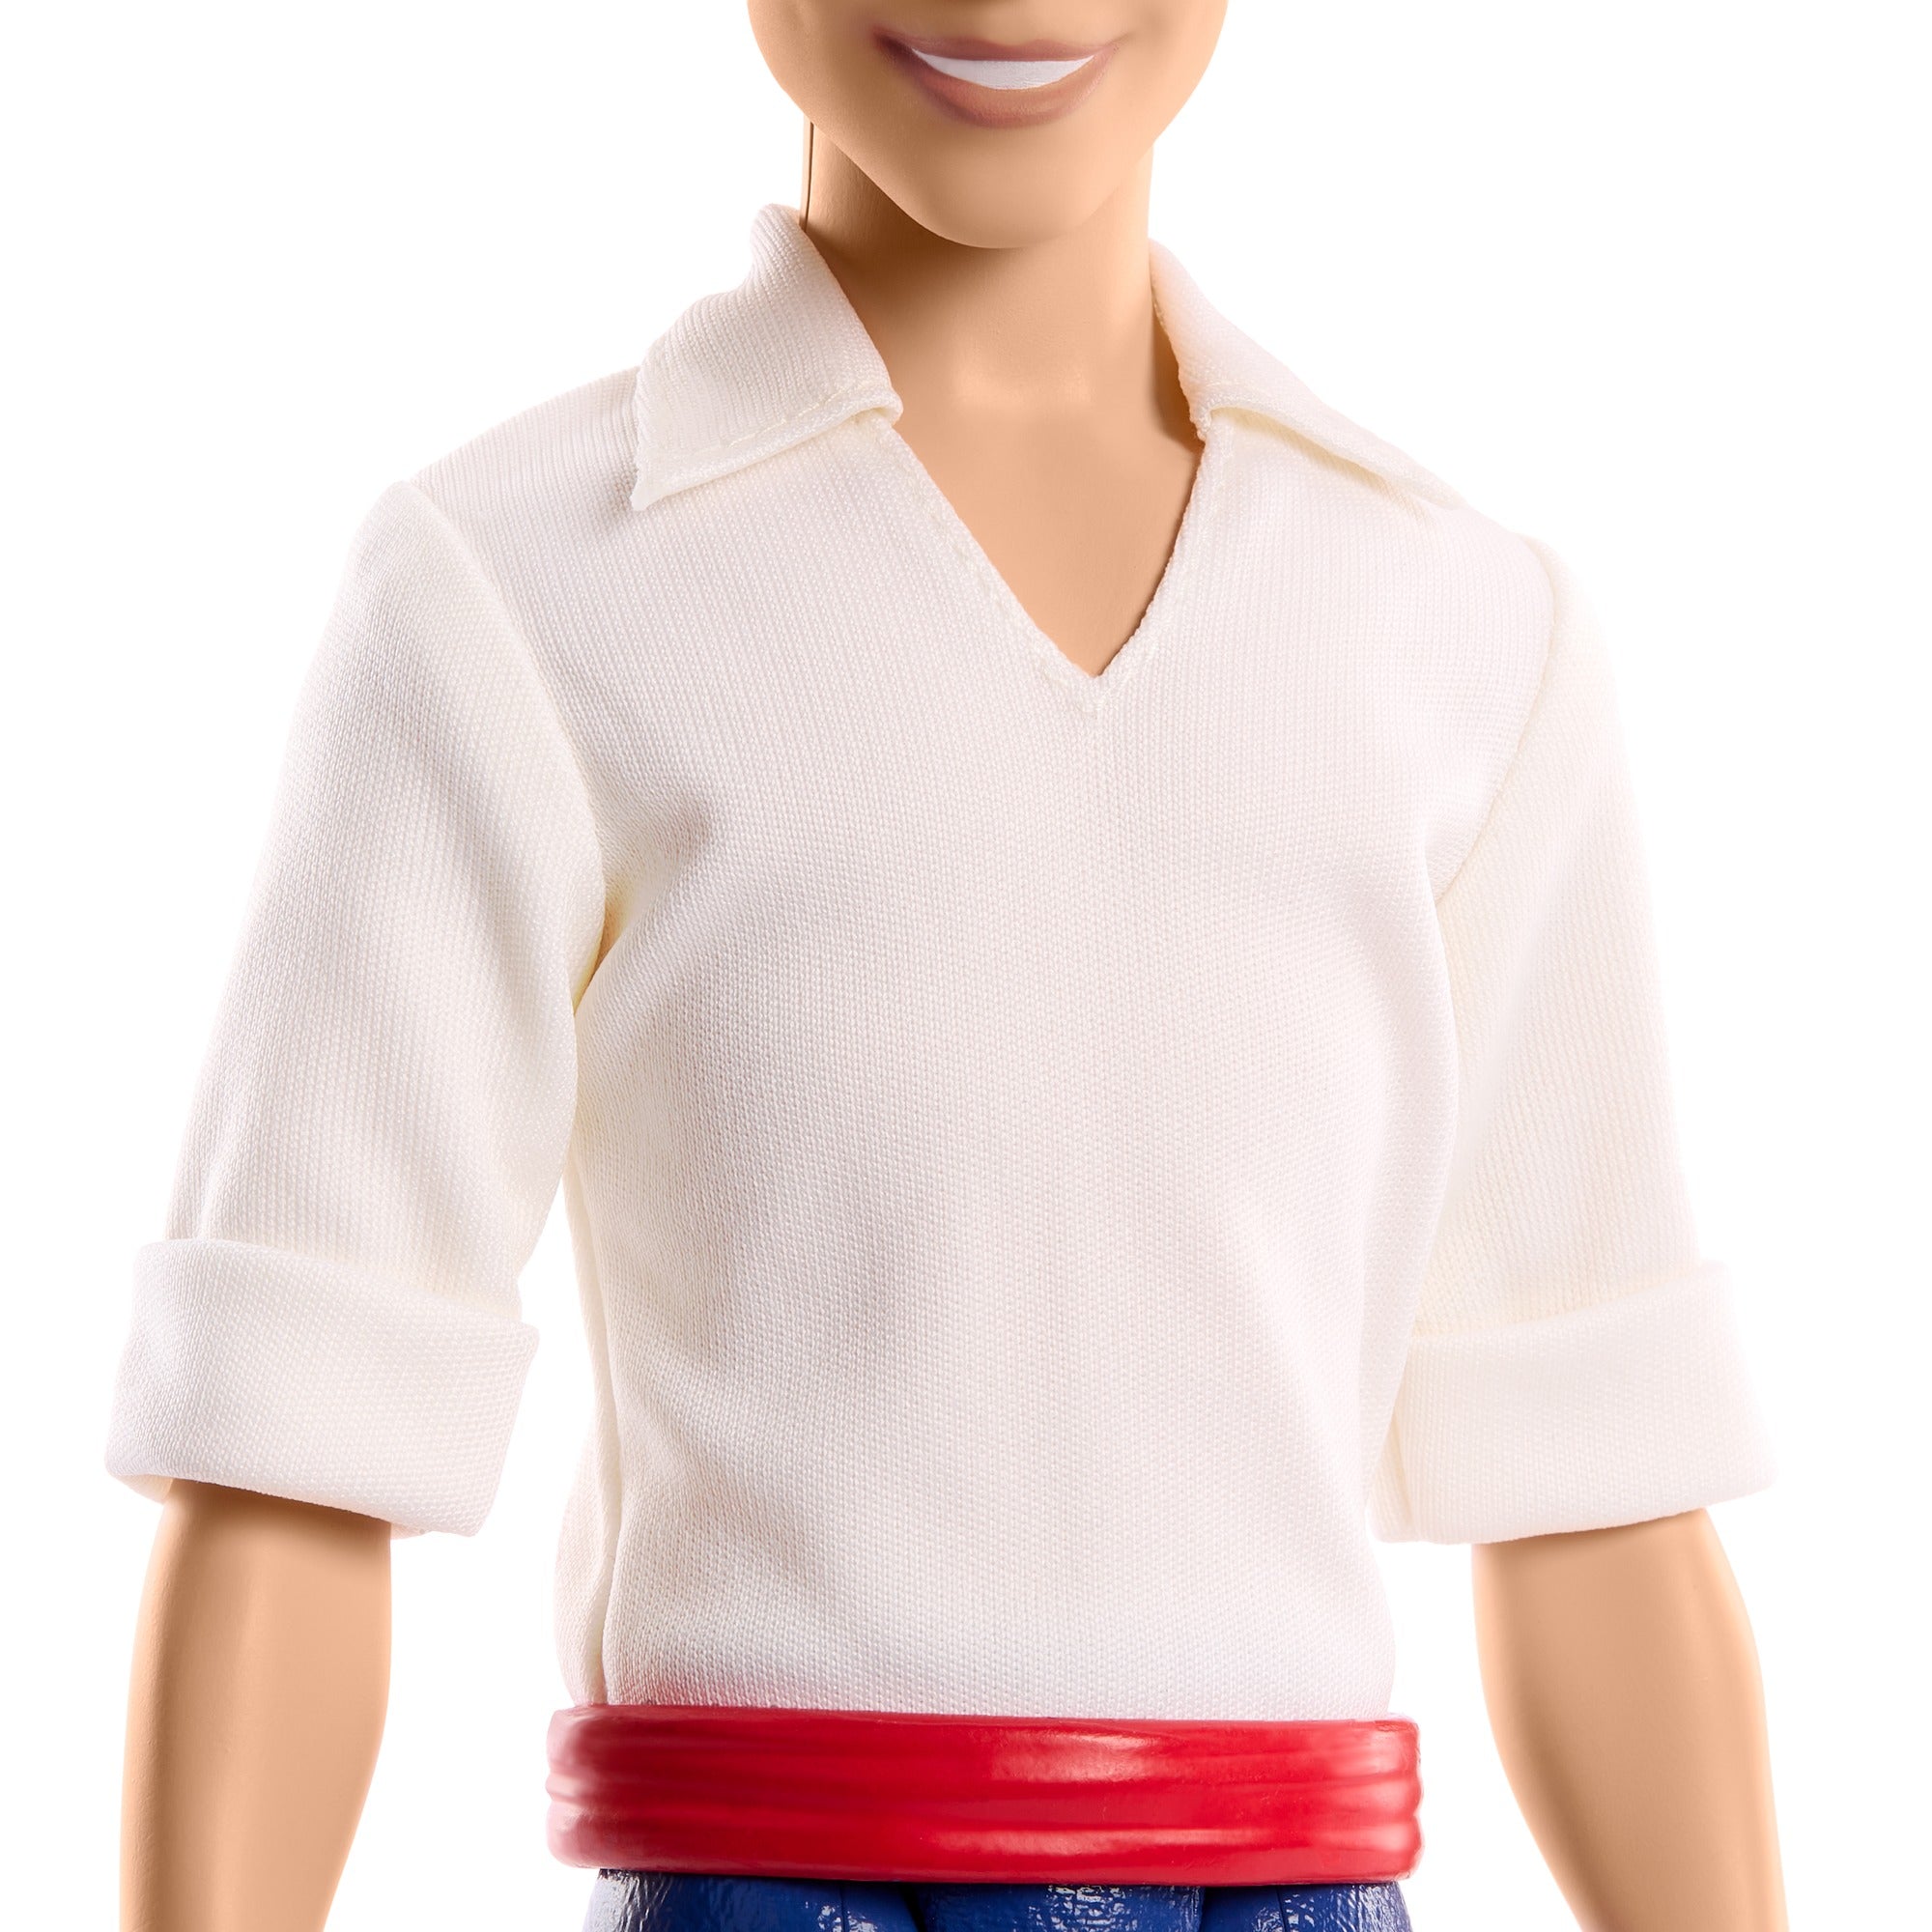 Disney Princess Posable Prince Eric Fashion Doll in Signature Look Inspired by the Disney Movie The Little Mermaid for Kids Ages 3+